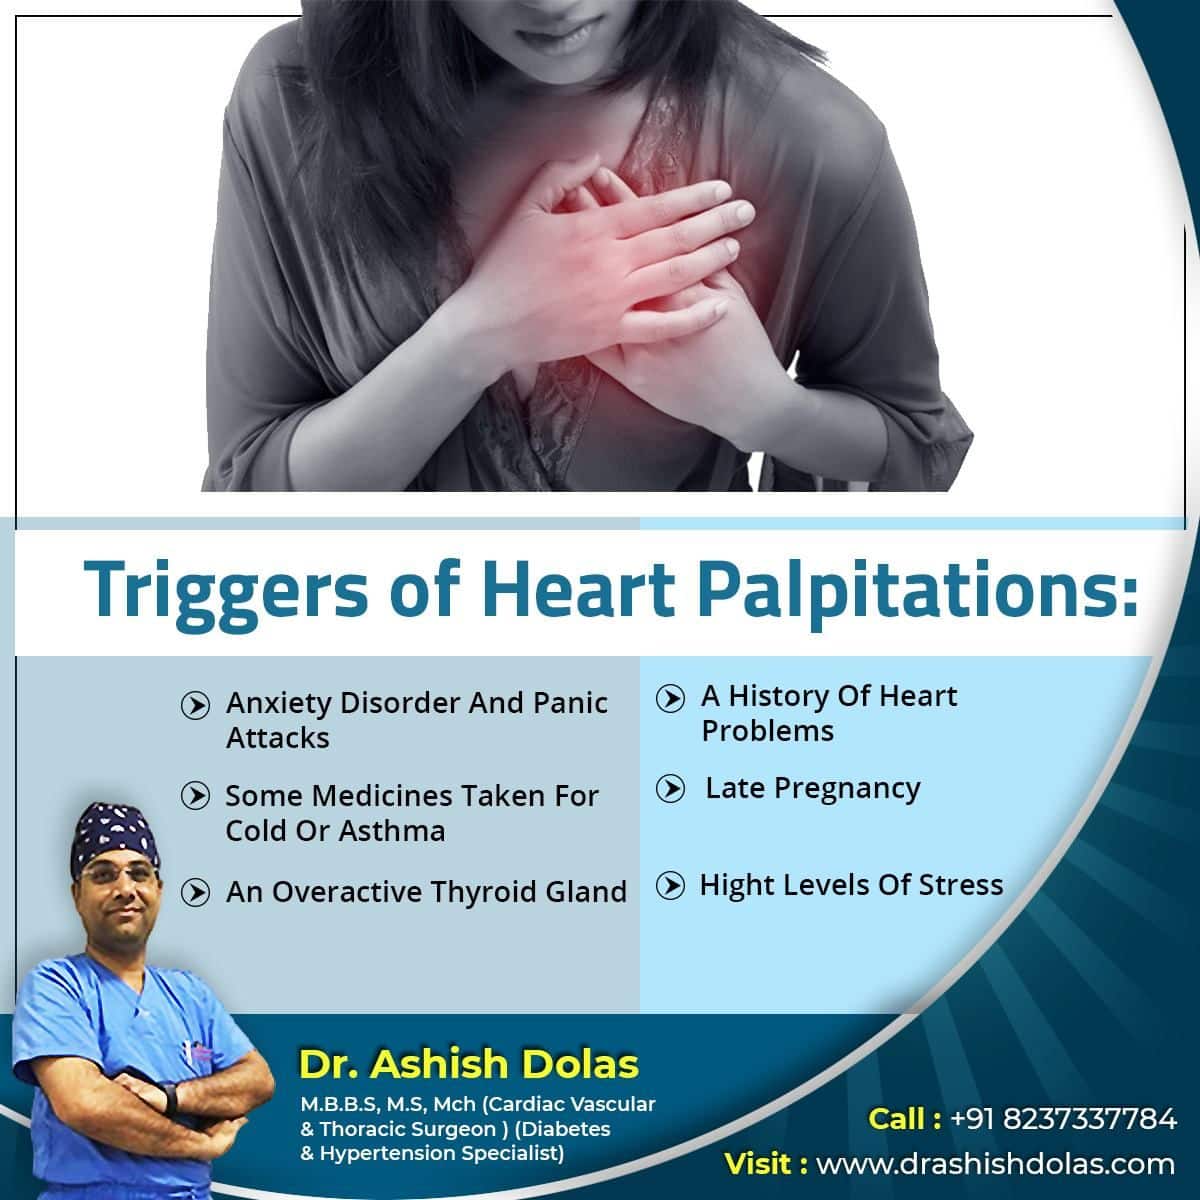 Triggers of Heart Palpitations_Dr. Ashish Dolas in 2020